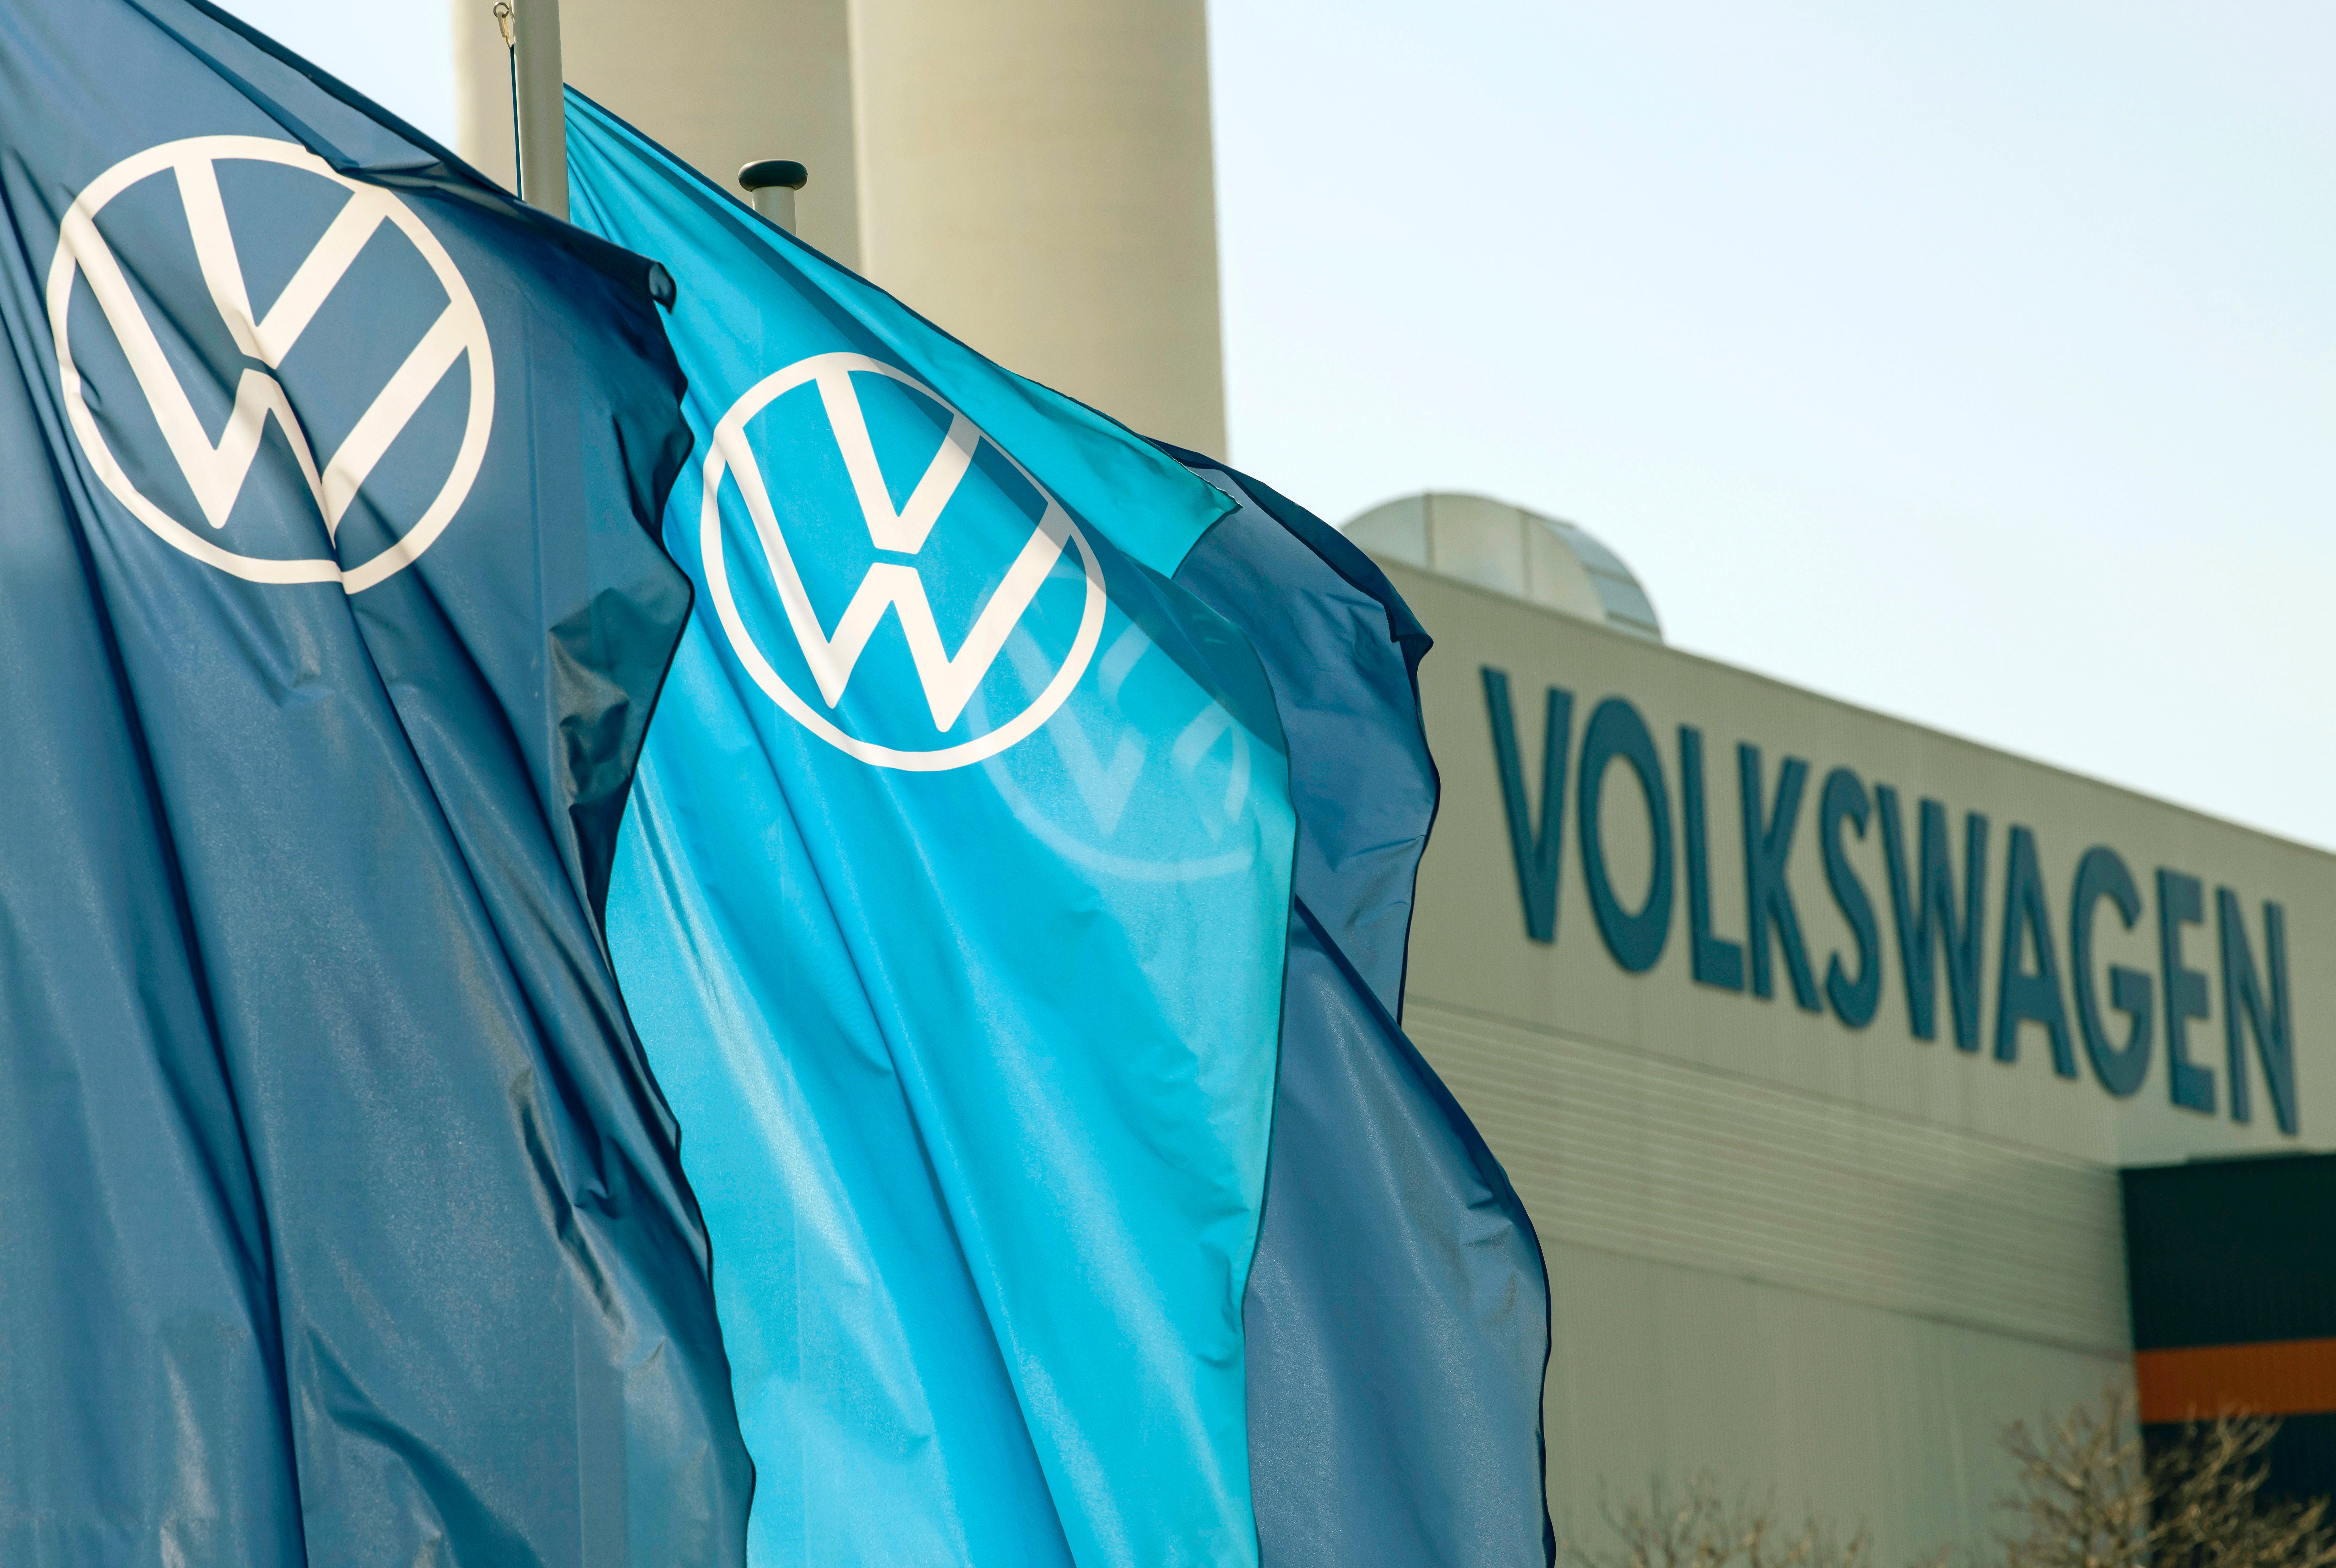 VW later admitted the announcement was a hoax